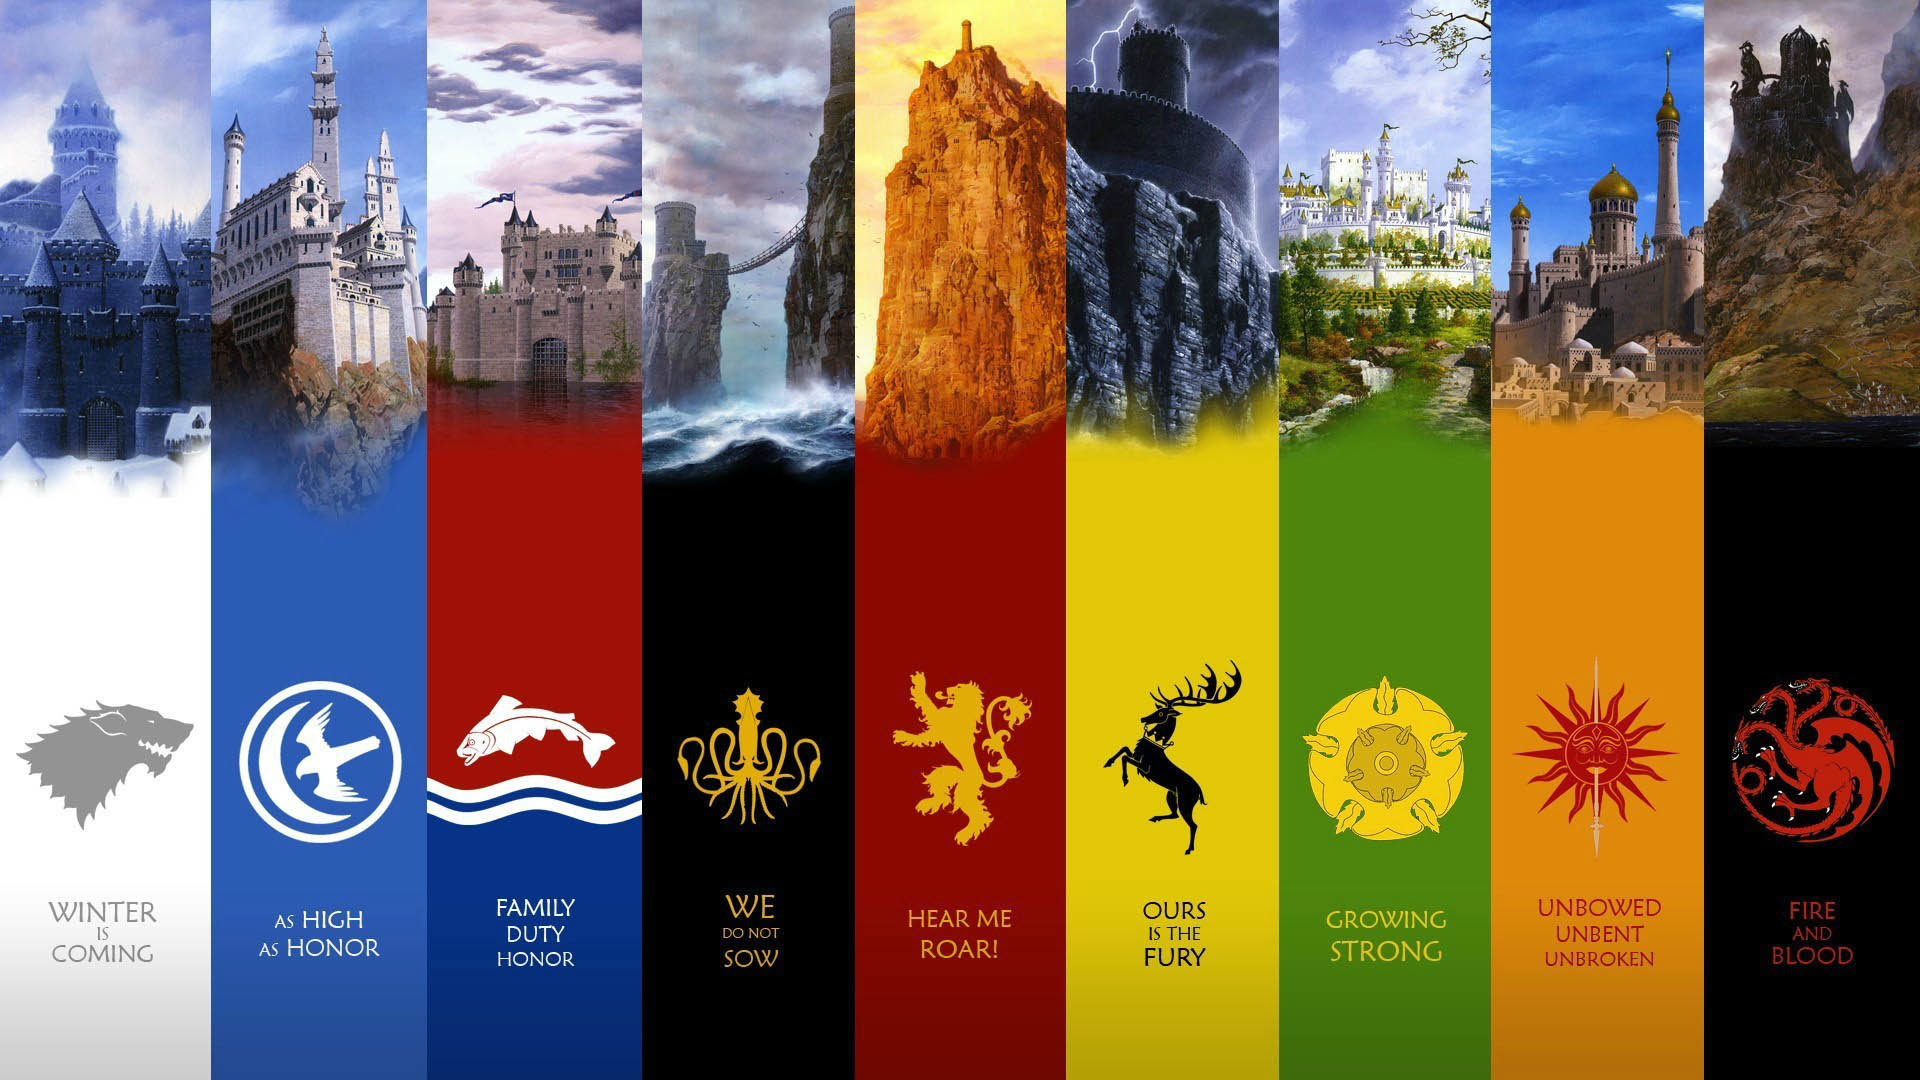 1920x1080 Game of Thrones House Flag & Castle  wallpaper